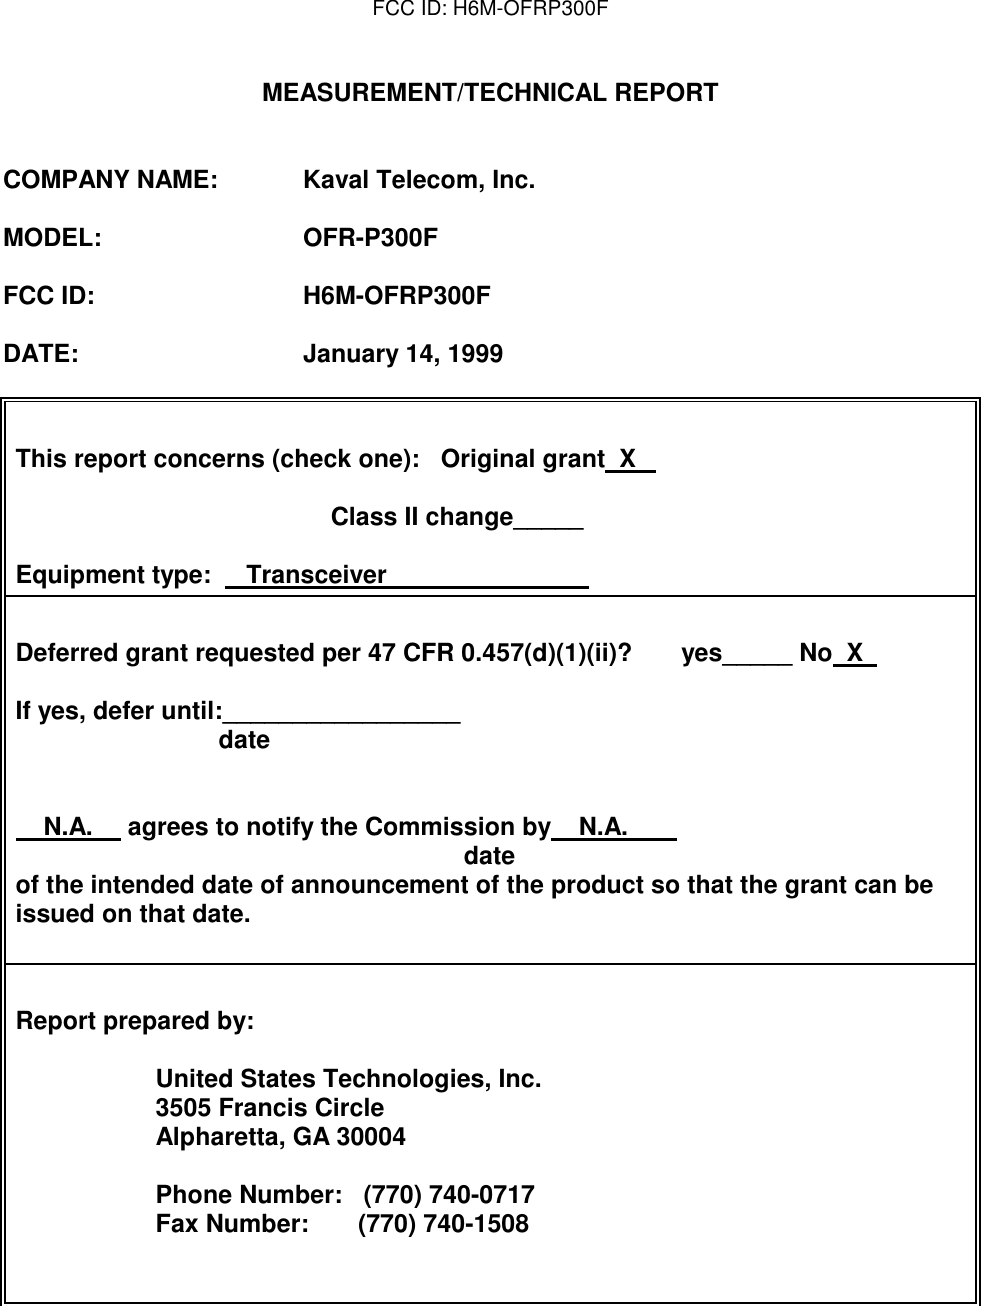 FCC ID: H6M-OFRP300FMEASUREMENT/TECHNICAL REPORTCOMPANY NAME: Kaval Telecom, Inc.MODEL: OFR-P300FFCC ID: H6M-OFRP300FDATE: January 14, 1999This report concerns (check one):   Original grant  X                                                                                           Class II change_____Equipment type:     Transceiver                                                                Deferred grant requested per 47 CFR 0.457(d)(1)(ii)?       yes_____ No  X                                                                                                     If yes, defer until:_________________                             date                                                                                                                                      N.A.     agrees to notify the Commission by    N.A.                                                                       date      of the intended date of announcement of the product so that the grant can beissued on that date.                             Report prepared by:                    United States Technologies, Inc.                    3505 Francis Circle                    Alpharetta, GA 30004                                                                                                                                                                               Phone Number:   (770) 740-0717                                     Fax Number:       (770) 740-1508                                        